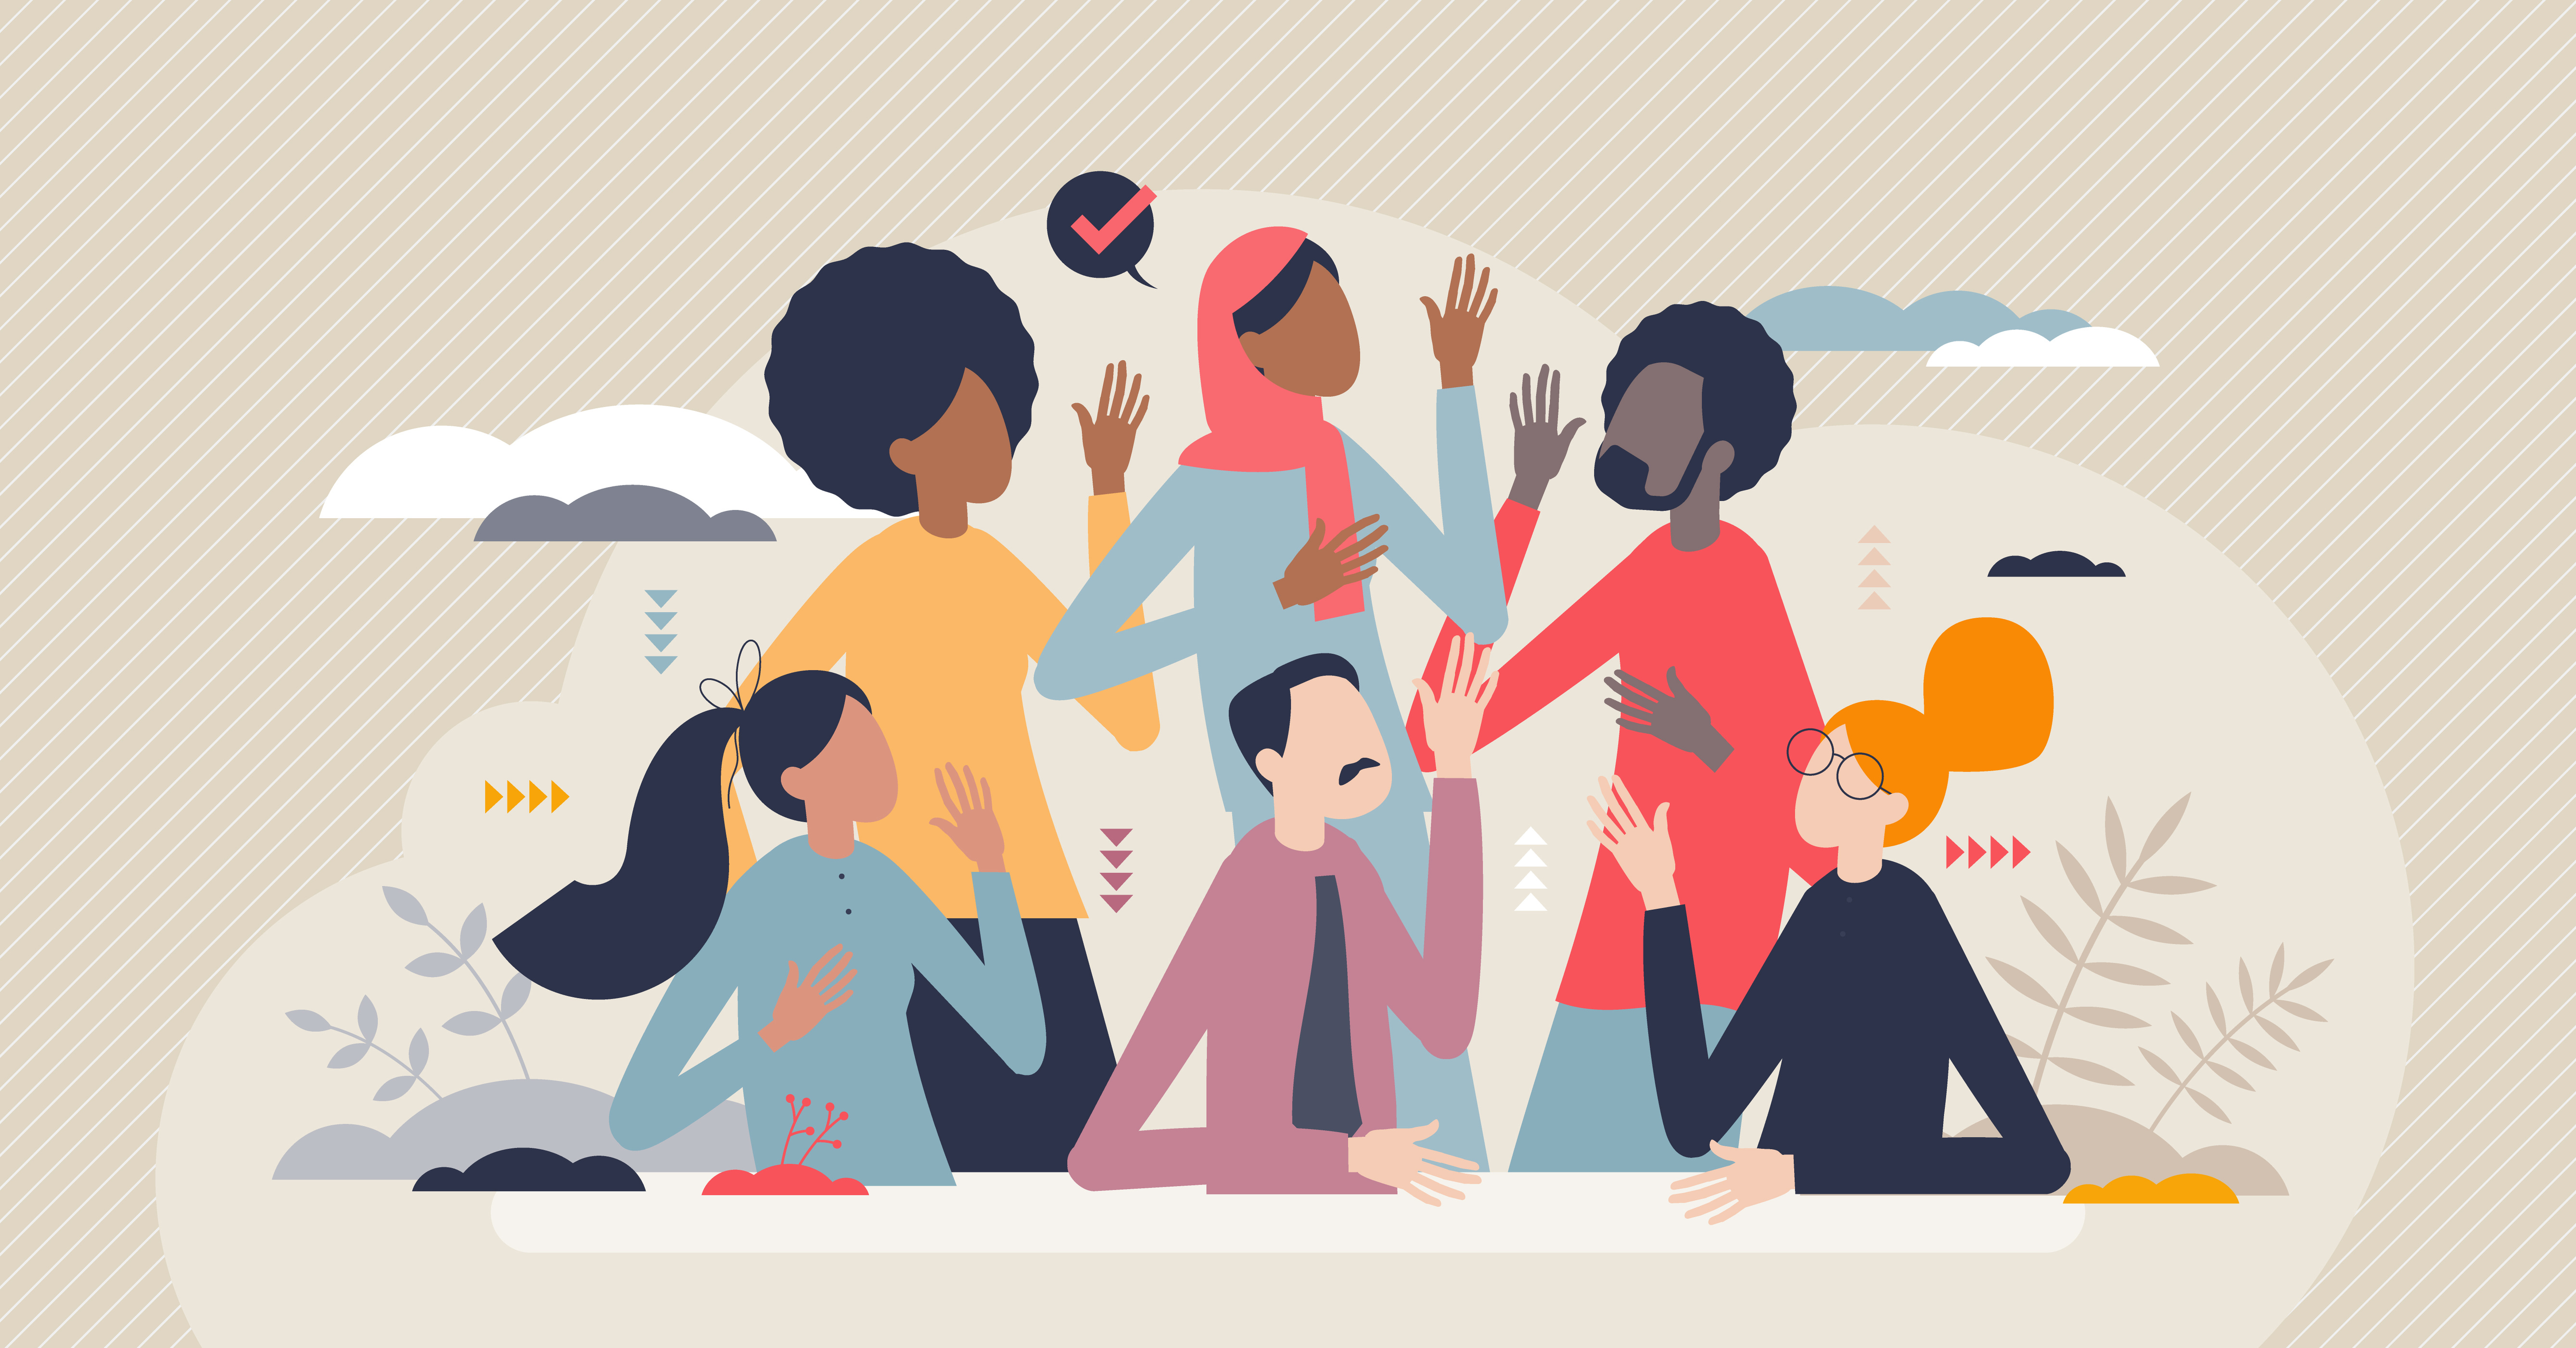 Community with various culture and race differences vector illustration. Integration and friendly solidarity for all groups